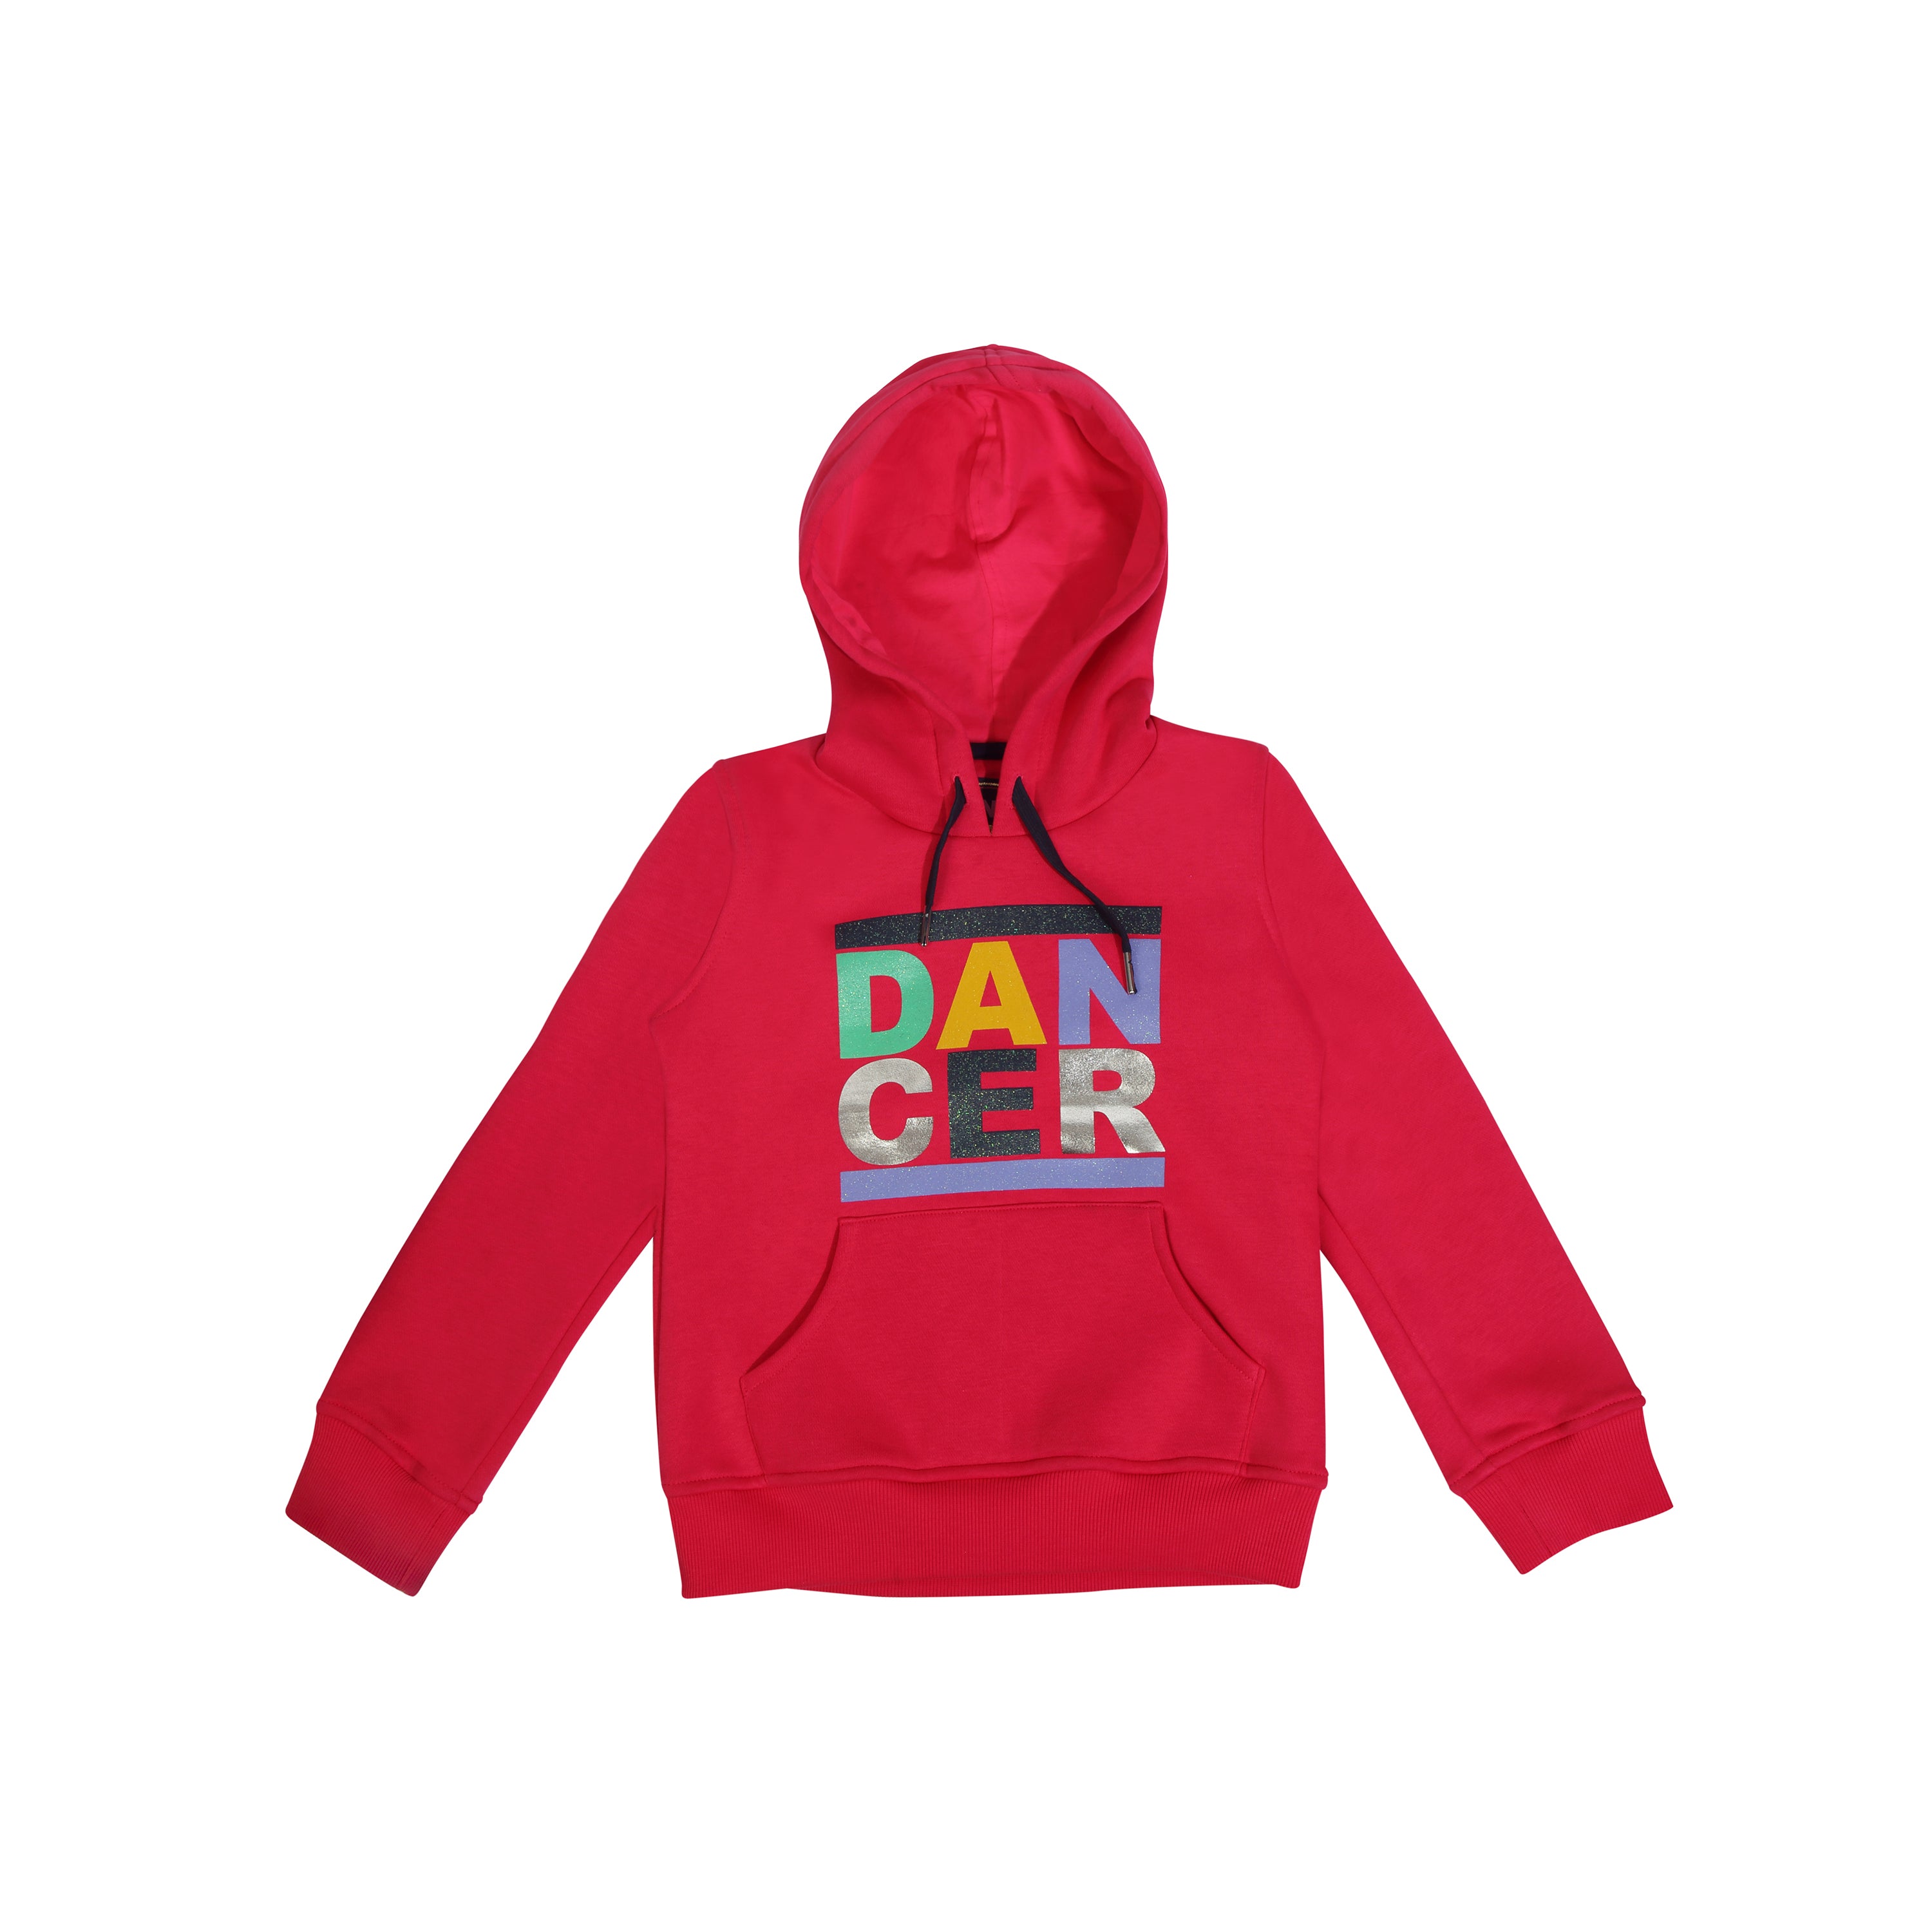 Dancer Hoodie With Contracting Drawstring And Front Pockets In Rani